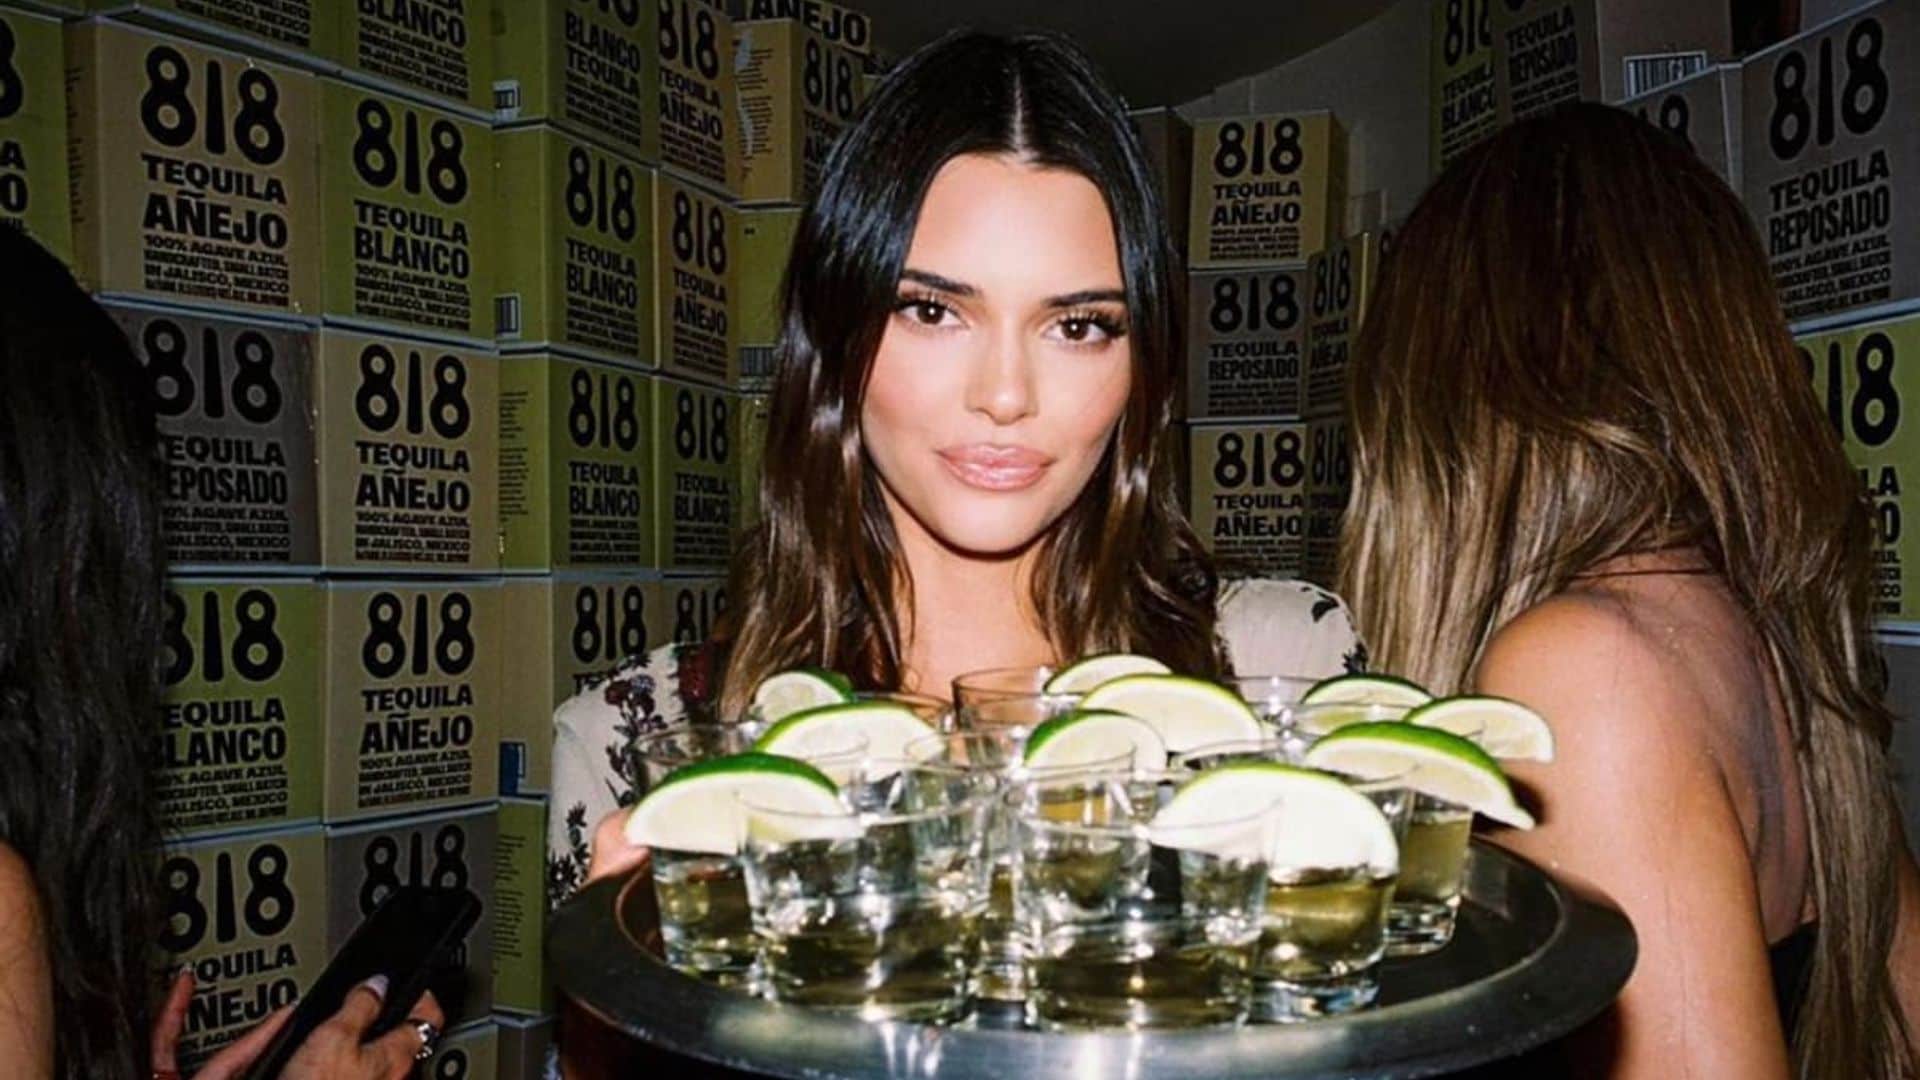 Kendall Jenner showed her followers a glimpse into 818 Tequila’s distillery